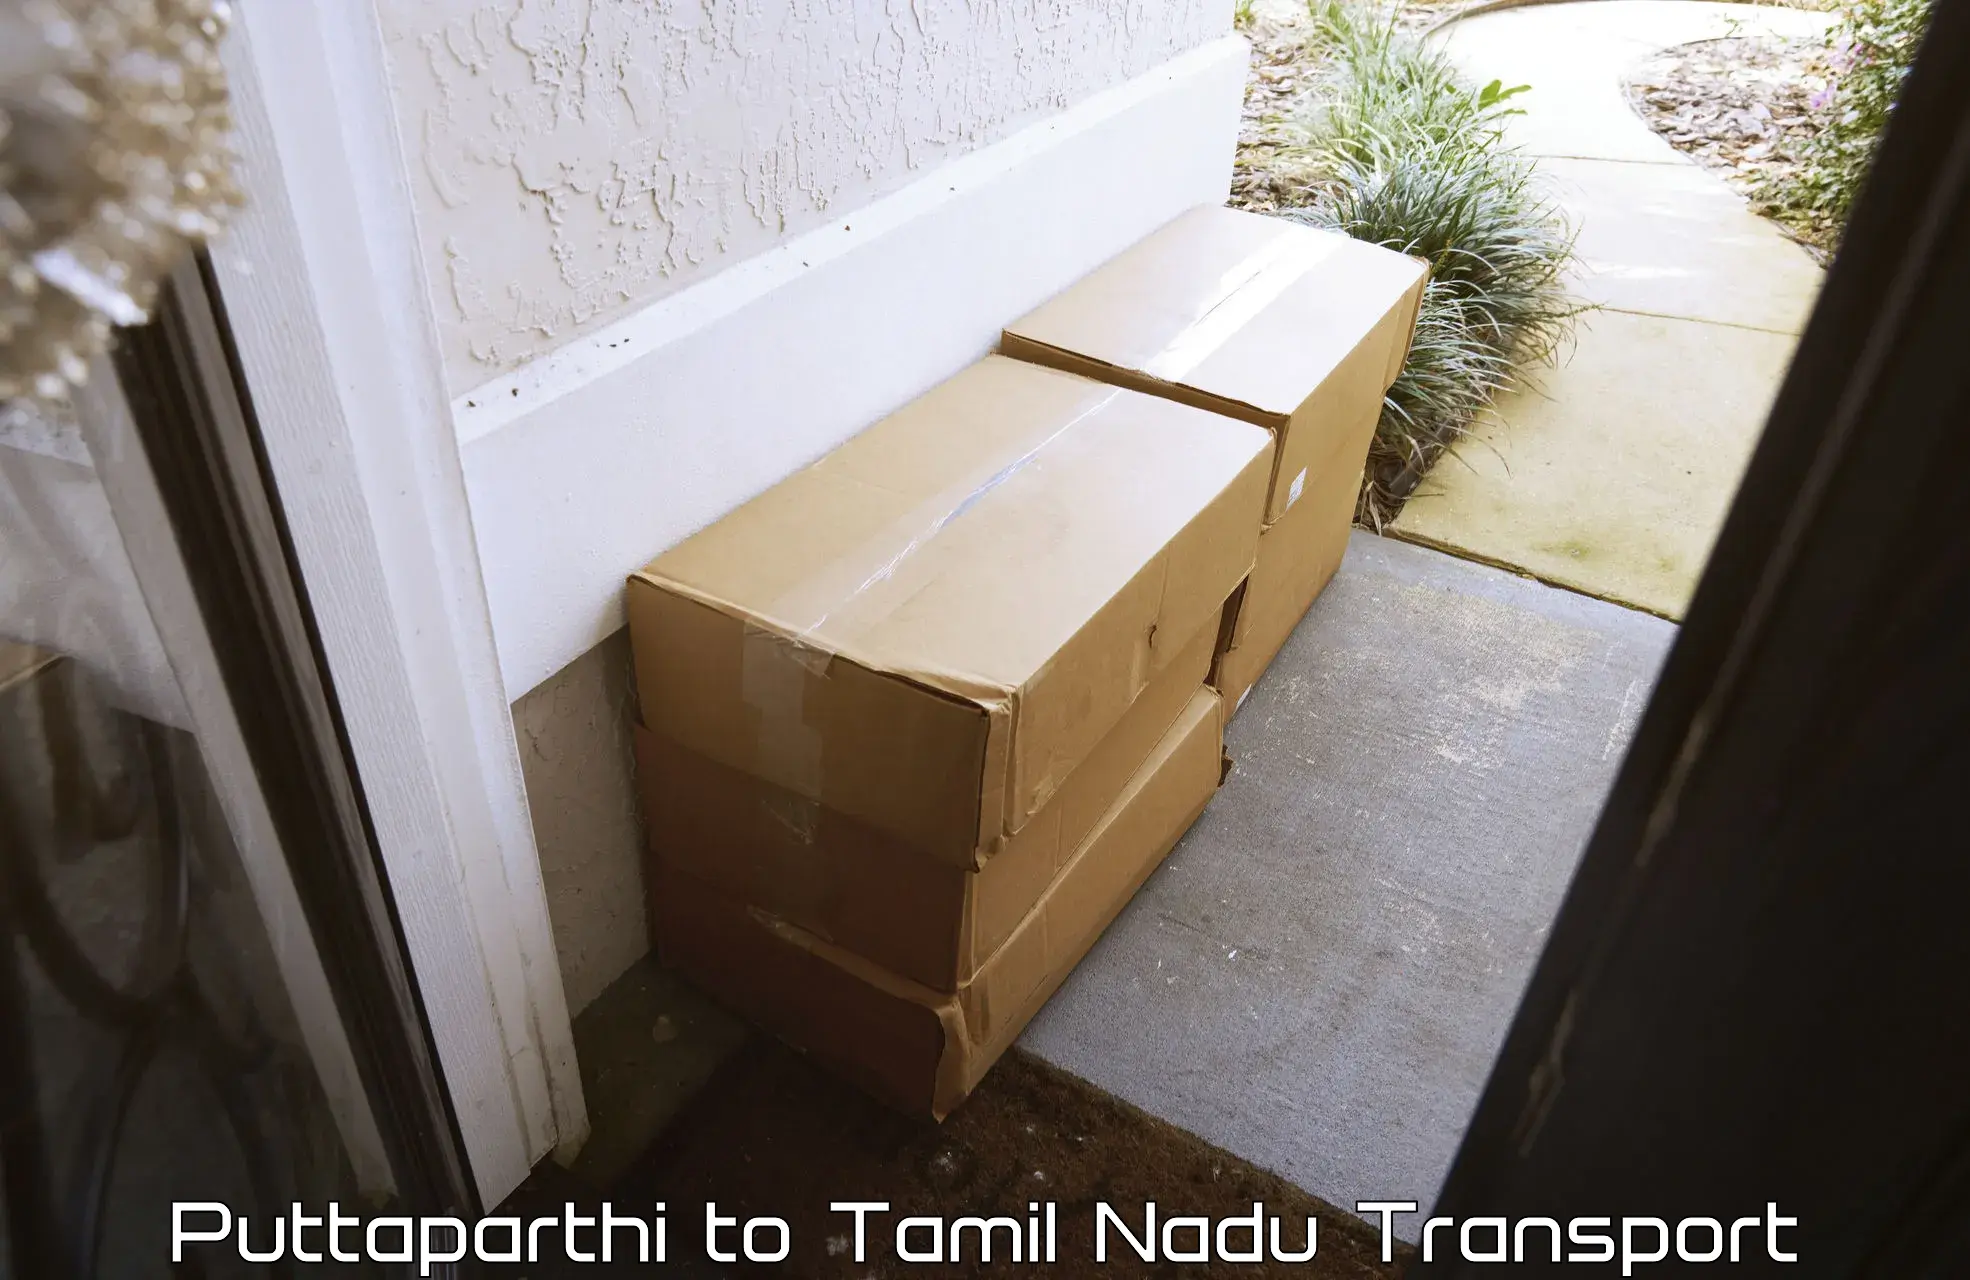 Container transport service Puttaparthi to Omalur